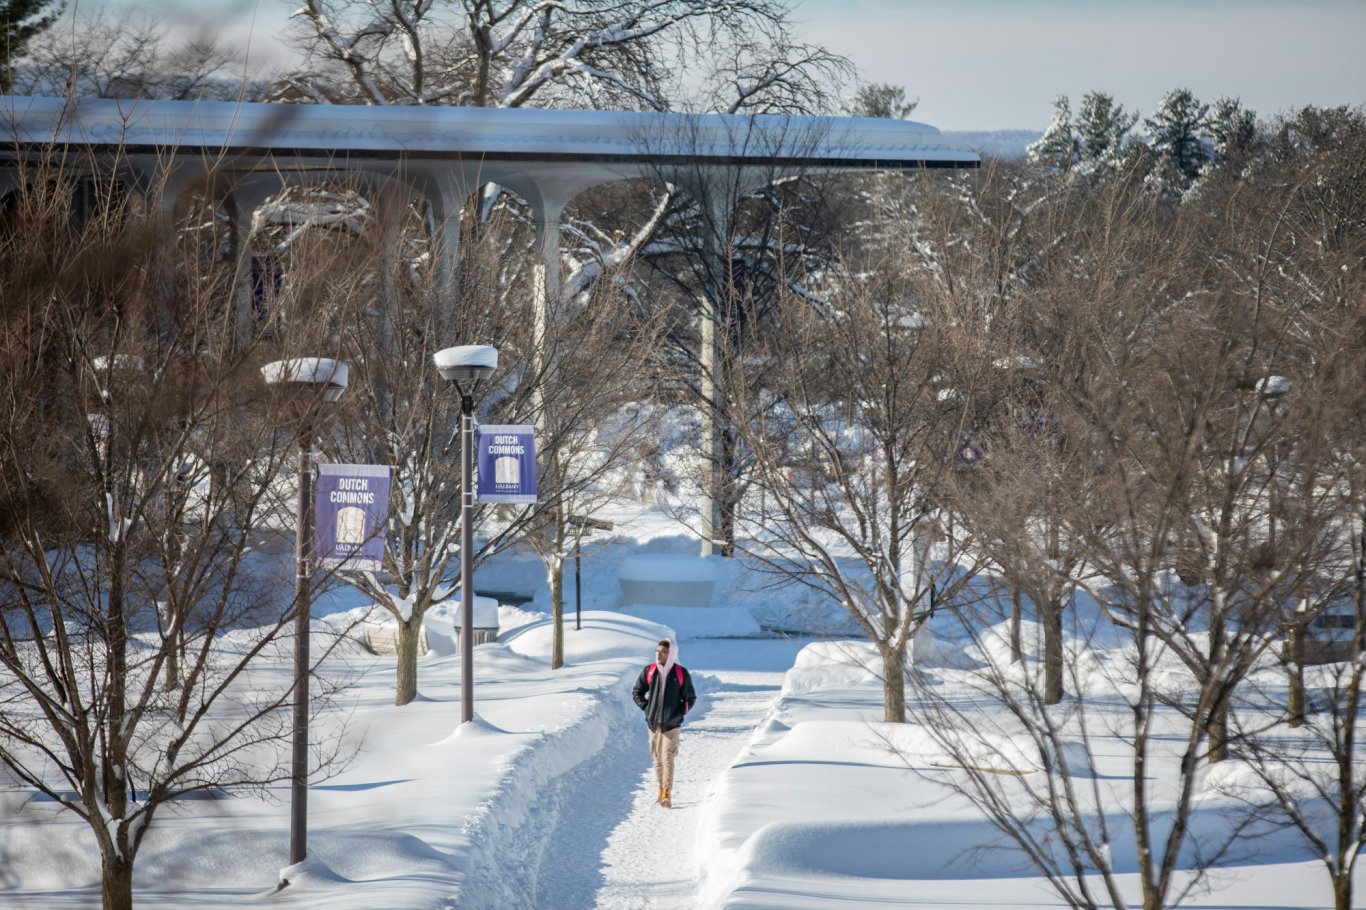 A snowy day on UAlbany's Main campus.